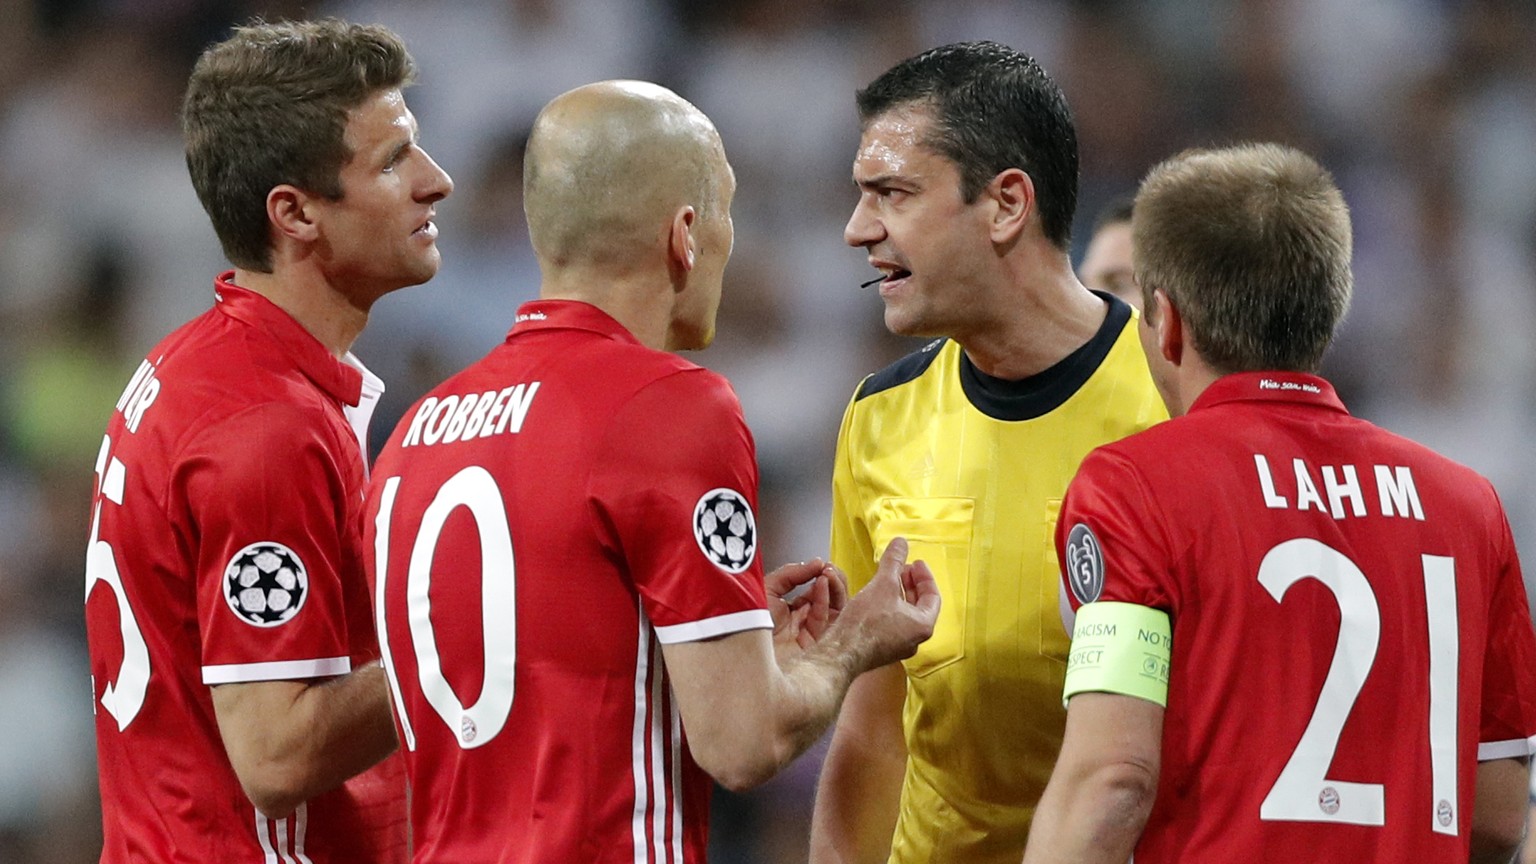 Bayern players argue with Referee Viktor Kassai after he showed a second yellow card to Arturo Vidal, left, during the Champions League quarterfinal second leg soccer match between Real Madrid and Bay ...